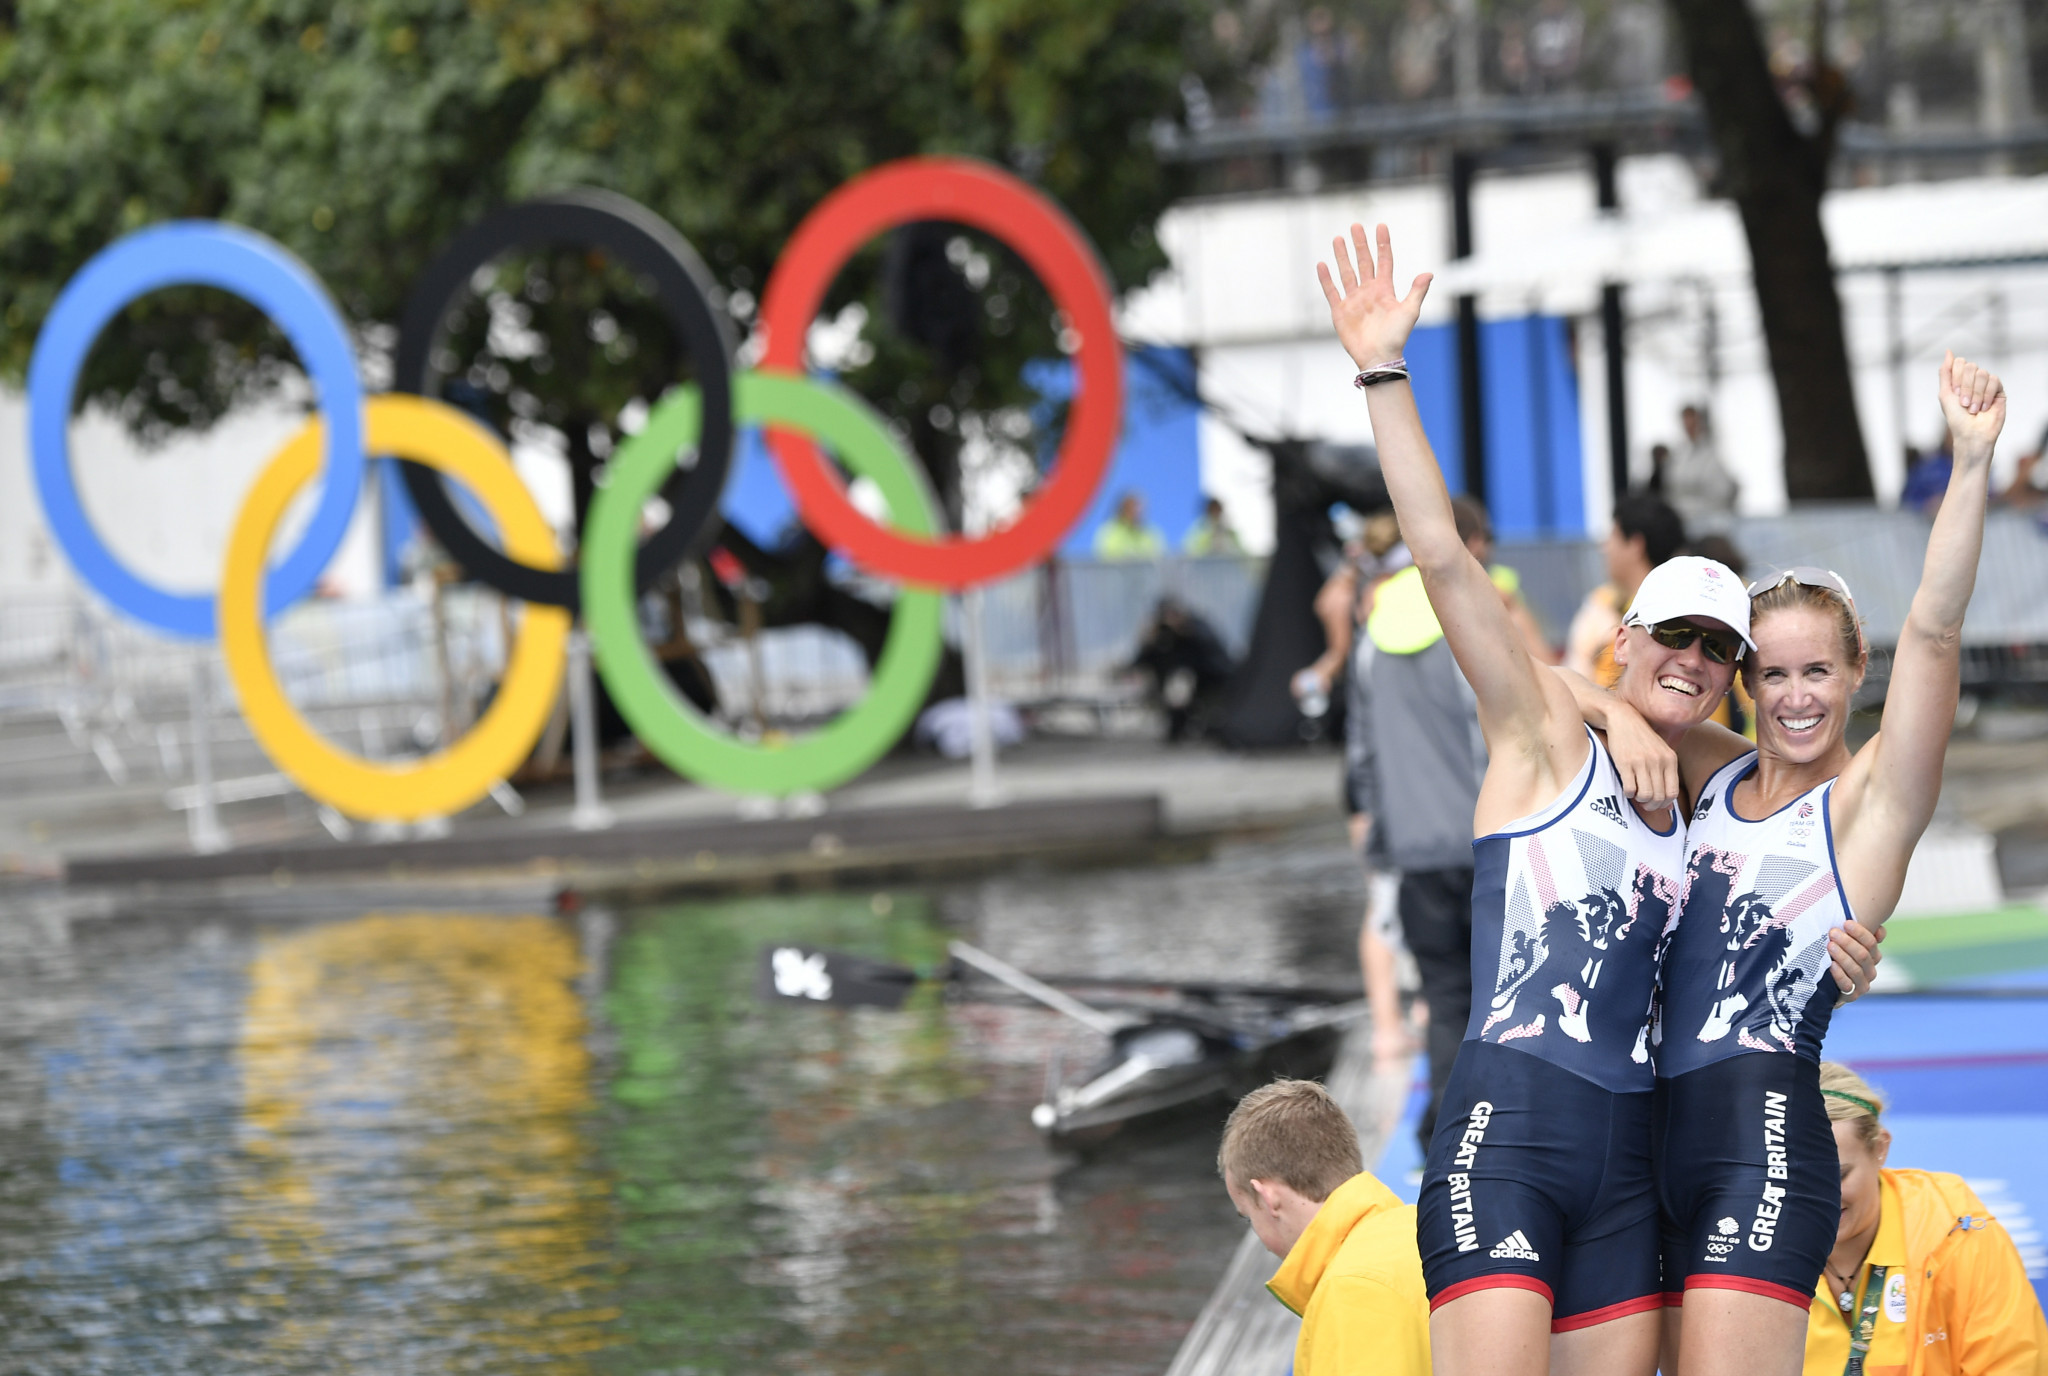 Helen Glover earned two Olympic golds in the women's coxless pairs with Heather Stanning ©Getty Images